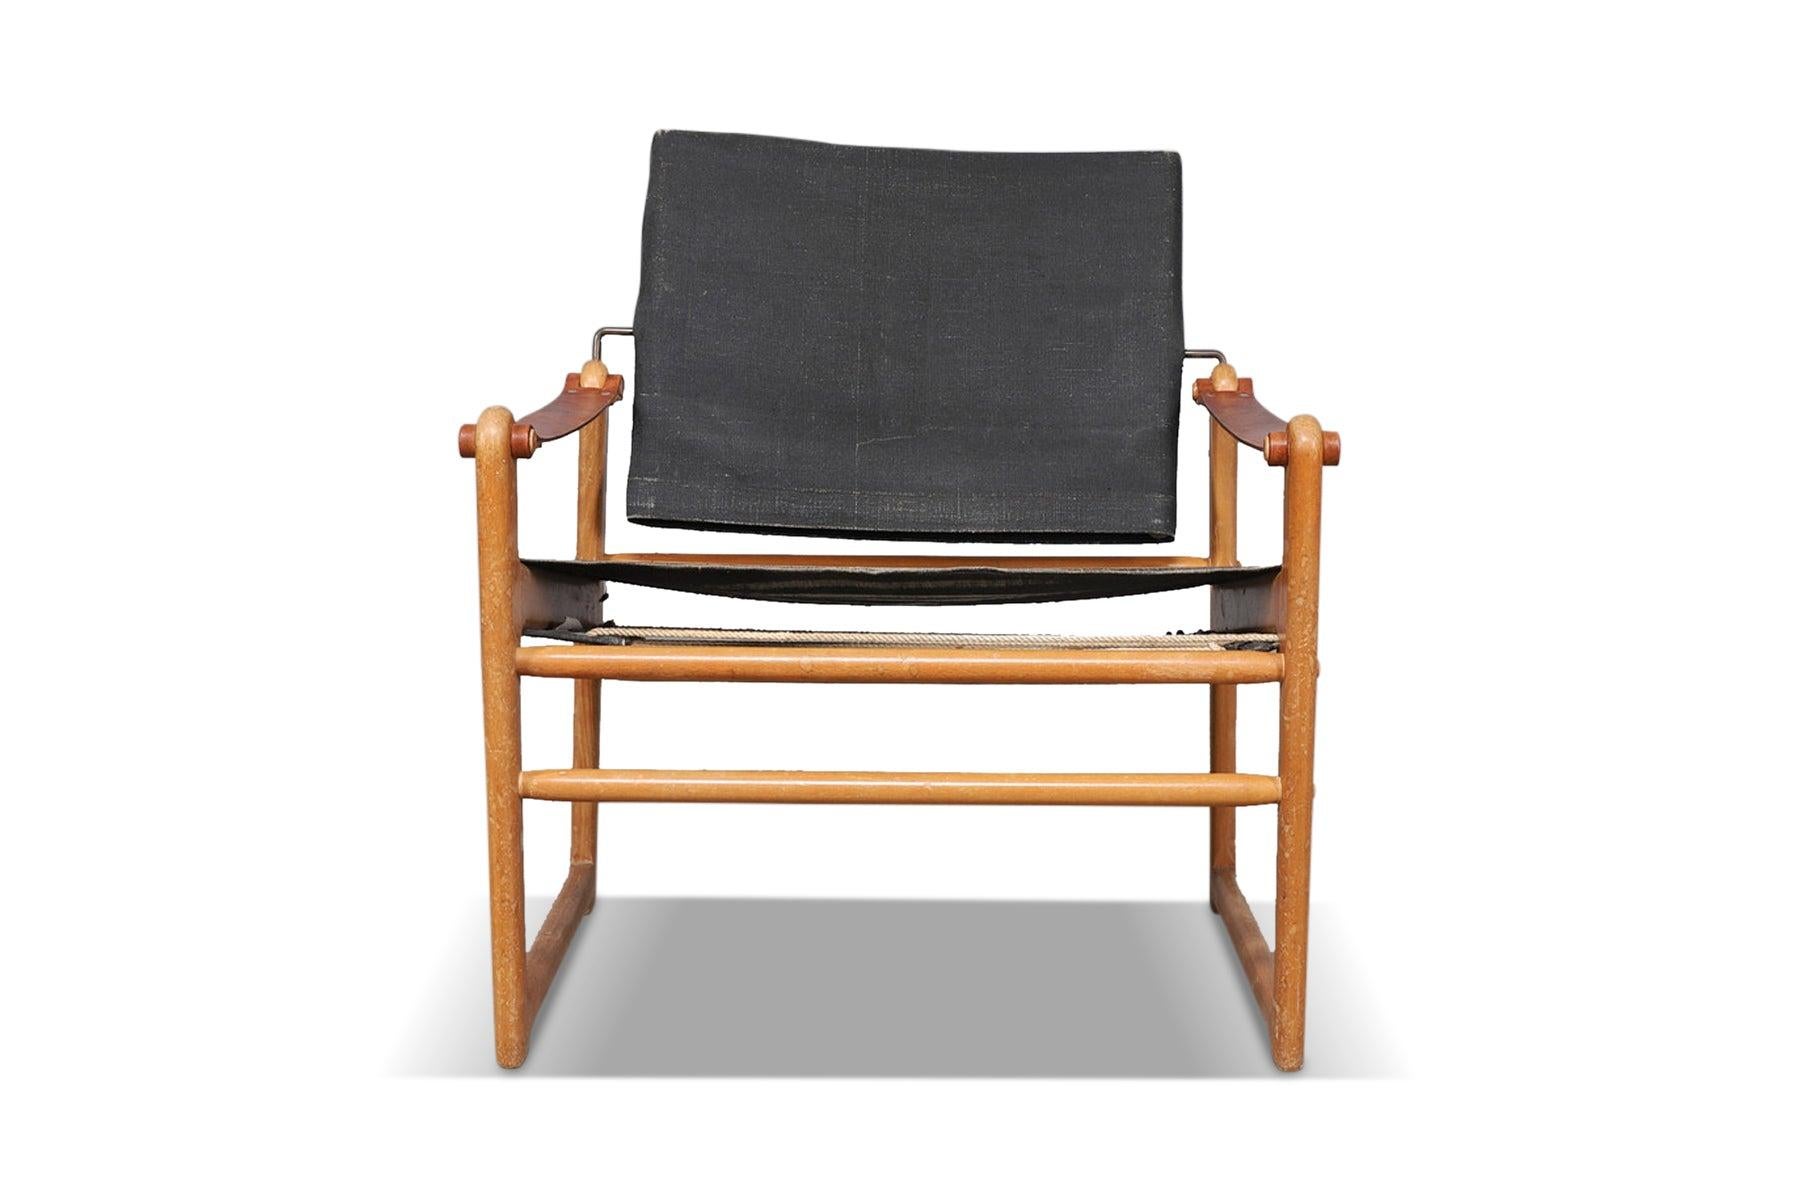 Origin: Sweden
Designer: Bengt Ruda
Manufacturer: IKEA
Era: 1964
Materials:
Measurements: 25? wide x 24.5? deep x 27.5? tall, Seat Height: 14? tall

Condition: In excellent original condition with vintage wear to canvas. Can be recovered at